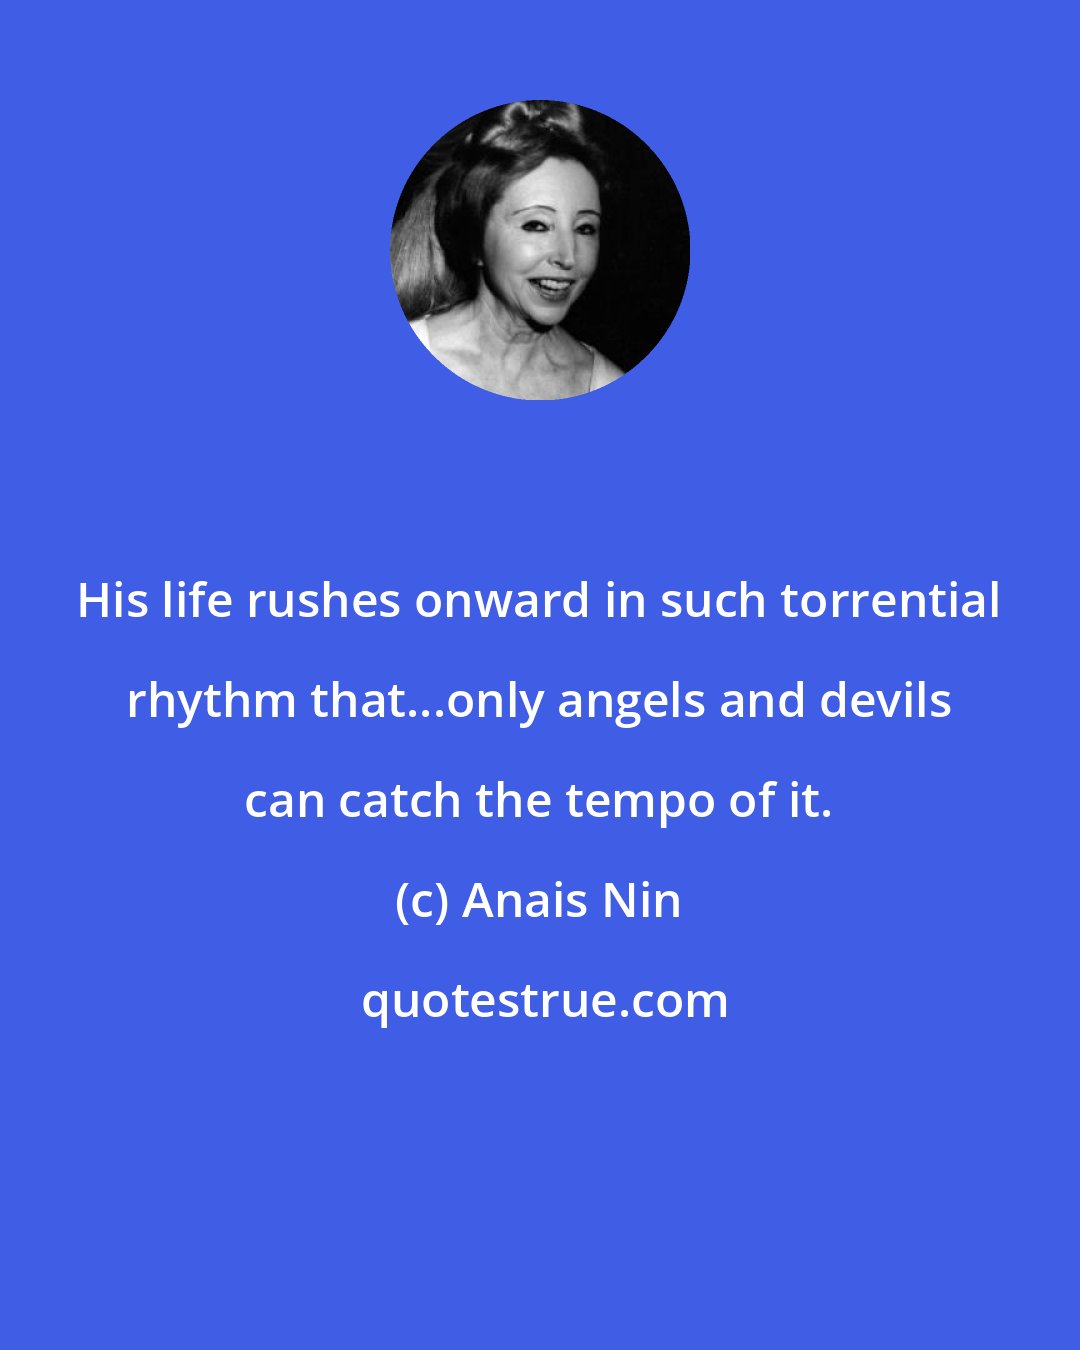 Anais Nin: His life rushes onward in such torrential rhythm that...only angels and devils can catch the tempo of it.